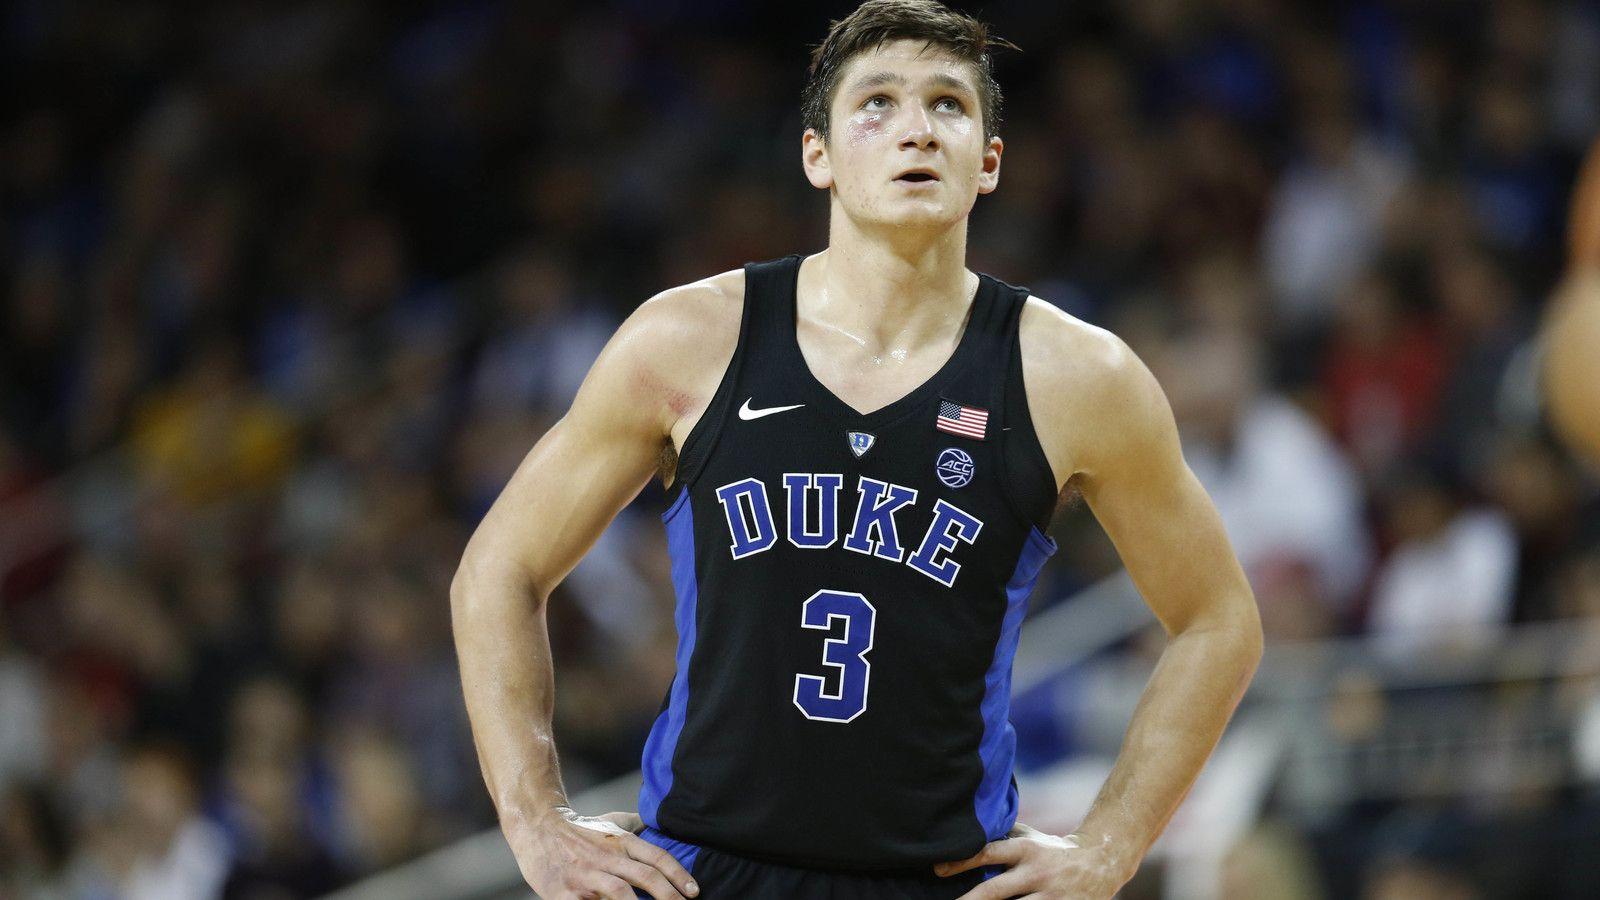 Grayson Allen received this black eye from an unlikely source